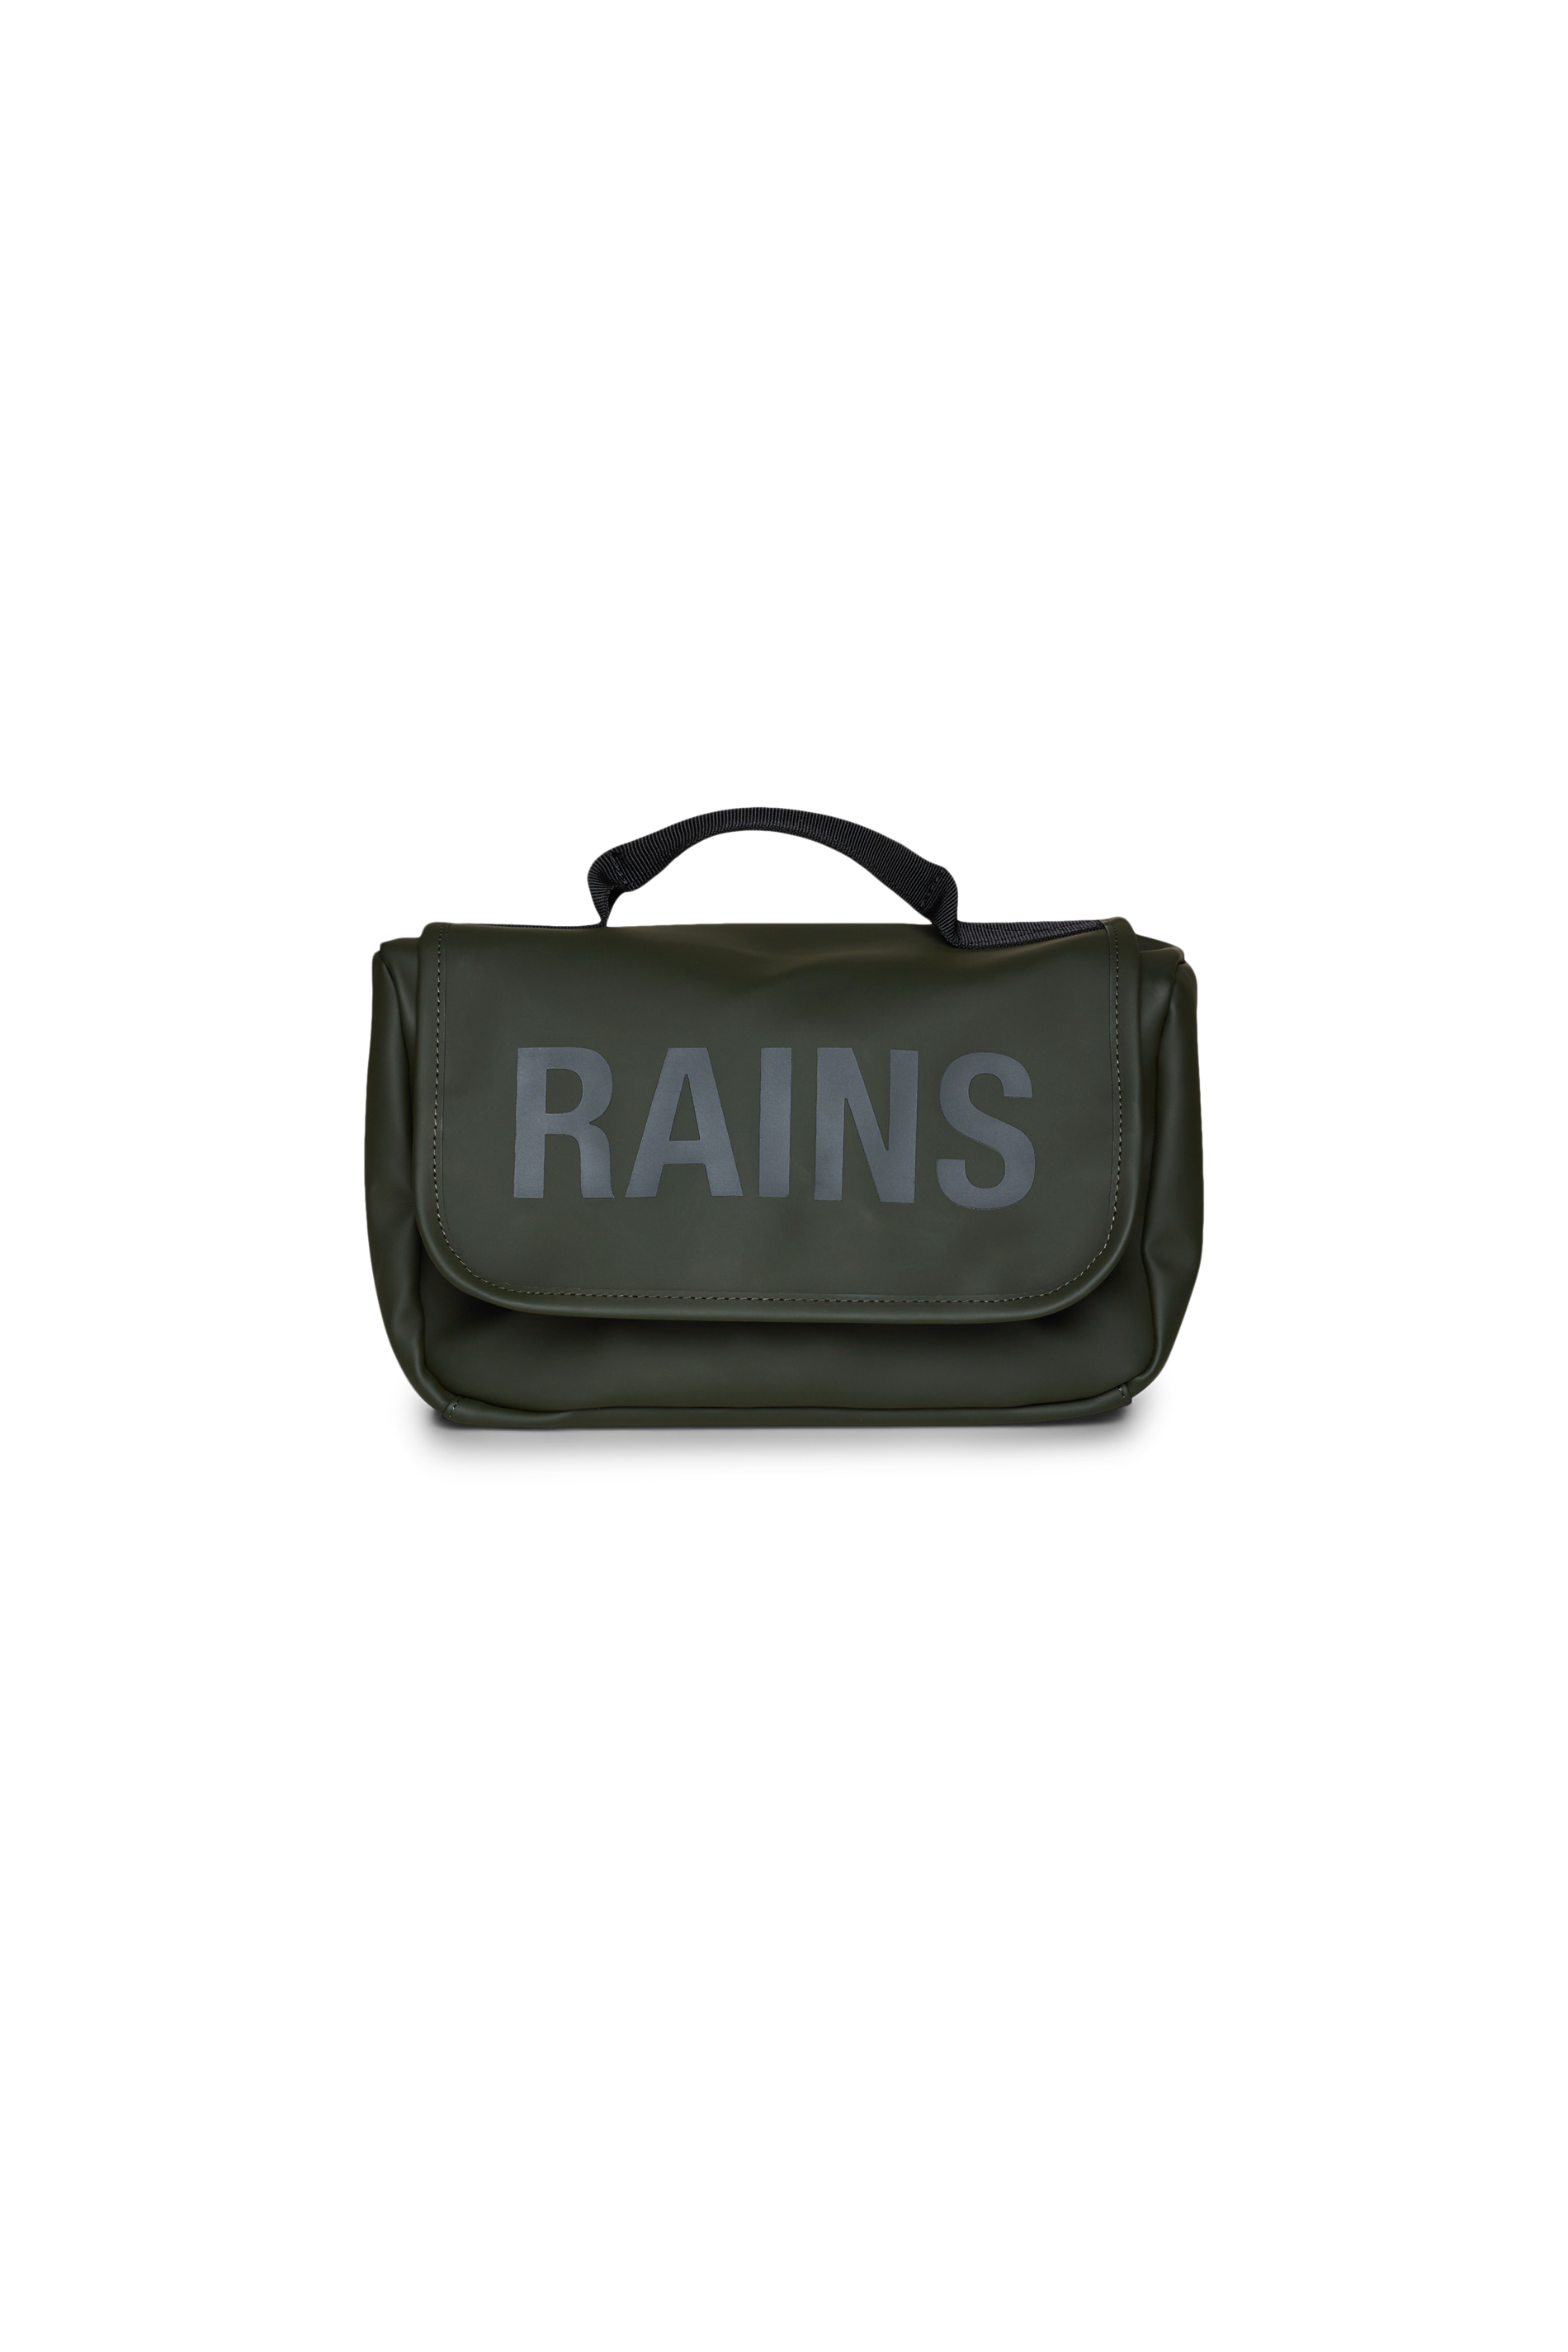 Rains® Texel Wash Bag in Green for $95 | Free Shipping